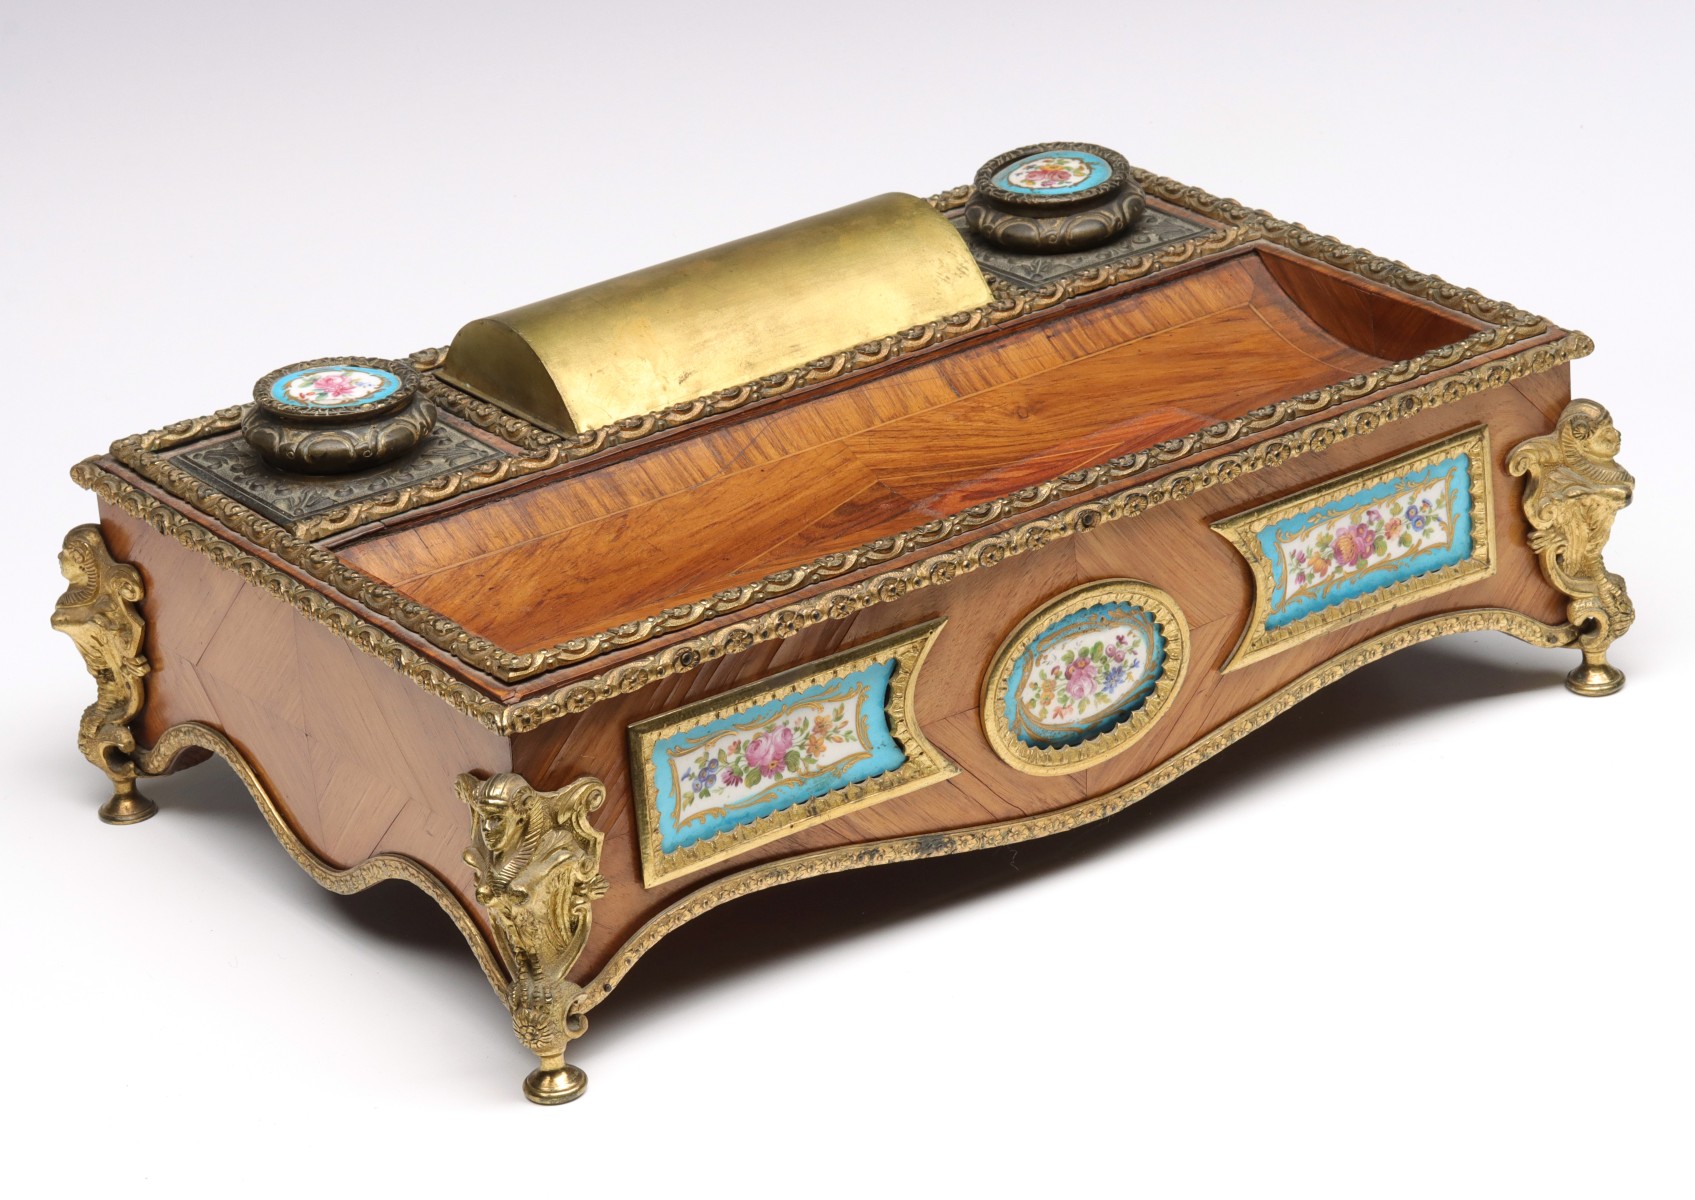 A VERY FINE 19TH CENTURY KINGWOOD AND ORMOLU INK STAND